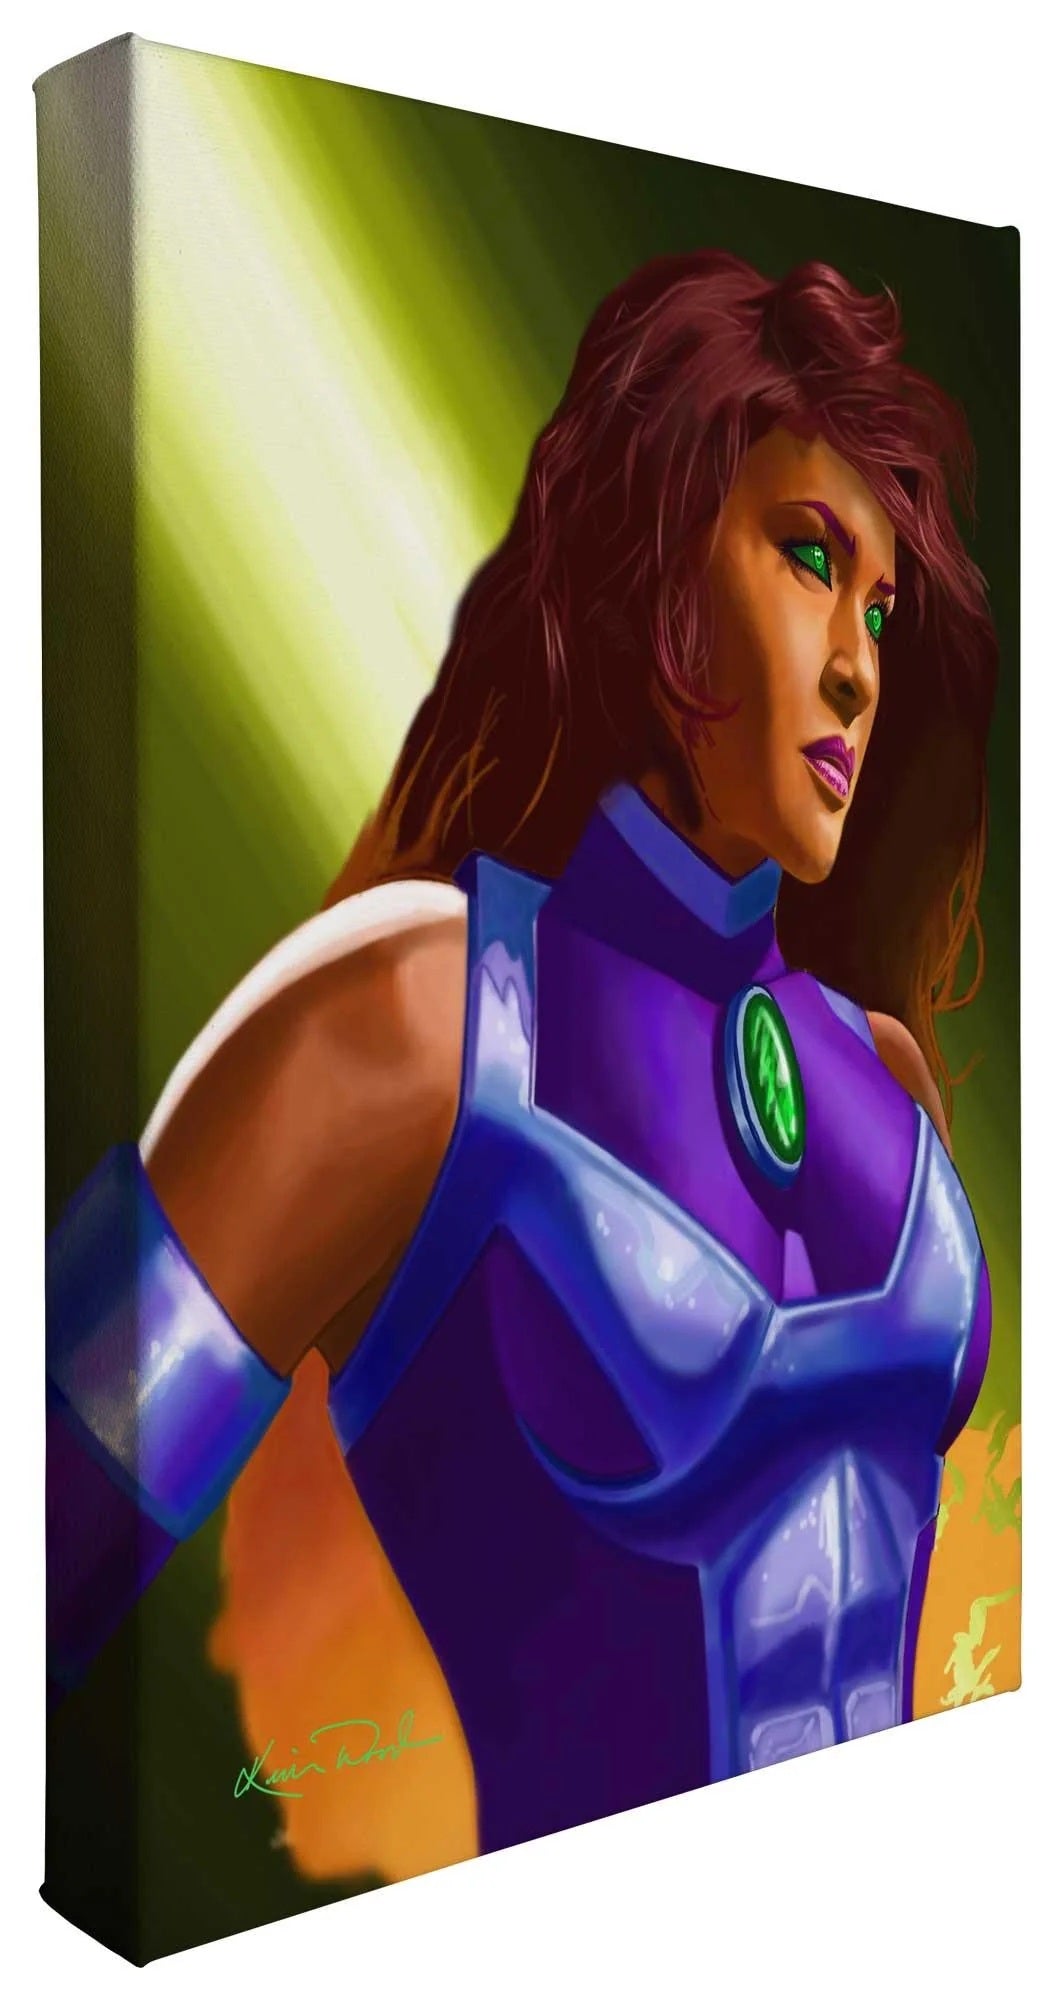 A portrait of DC Comics <span data-mce-fragment="1">Starfire, an extraterrestrial princess from the planet Tamaran.</span>